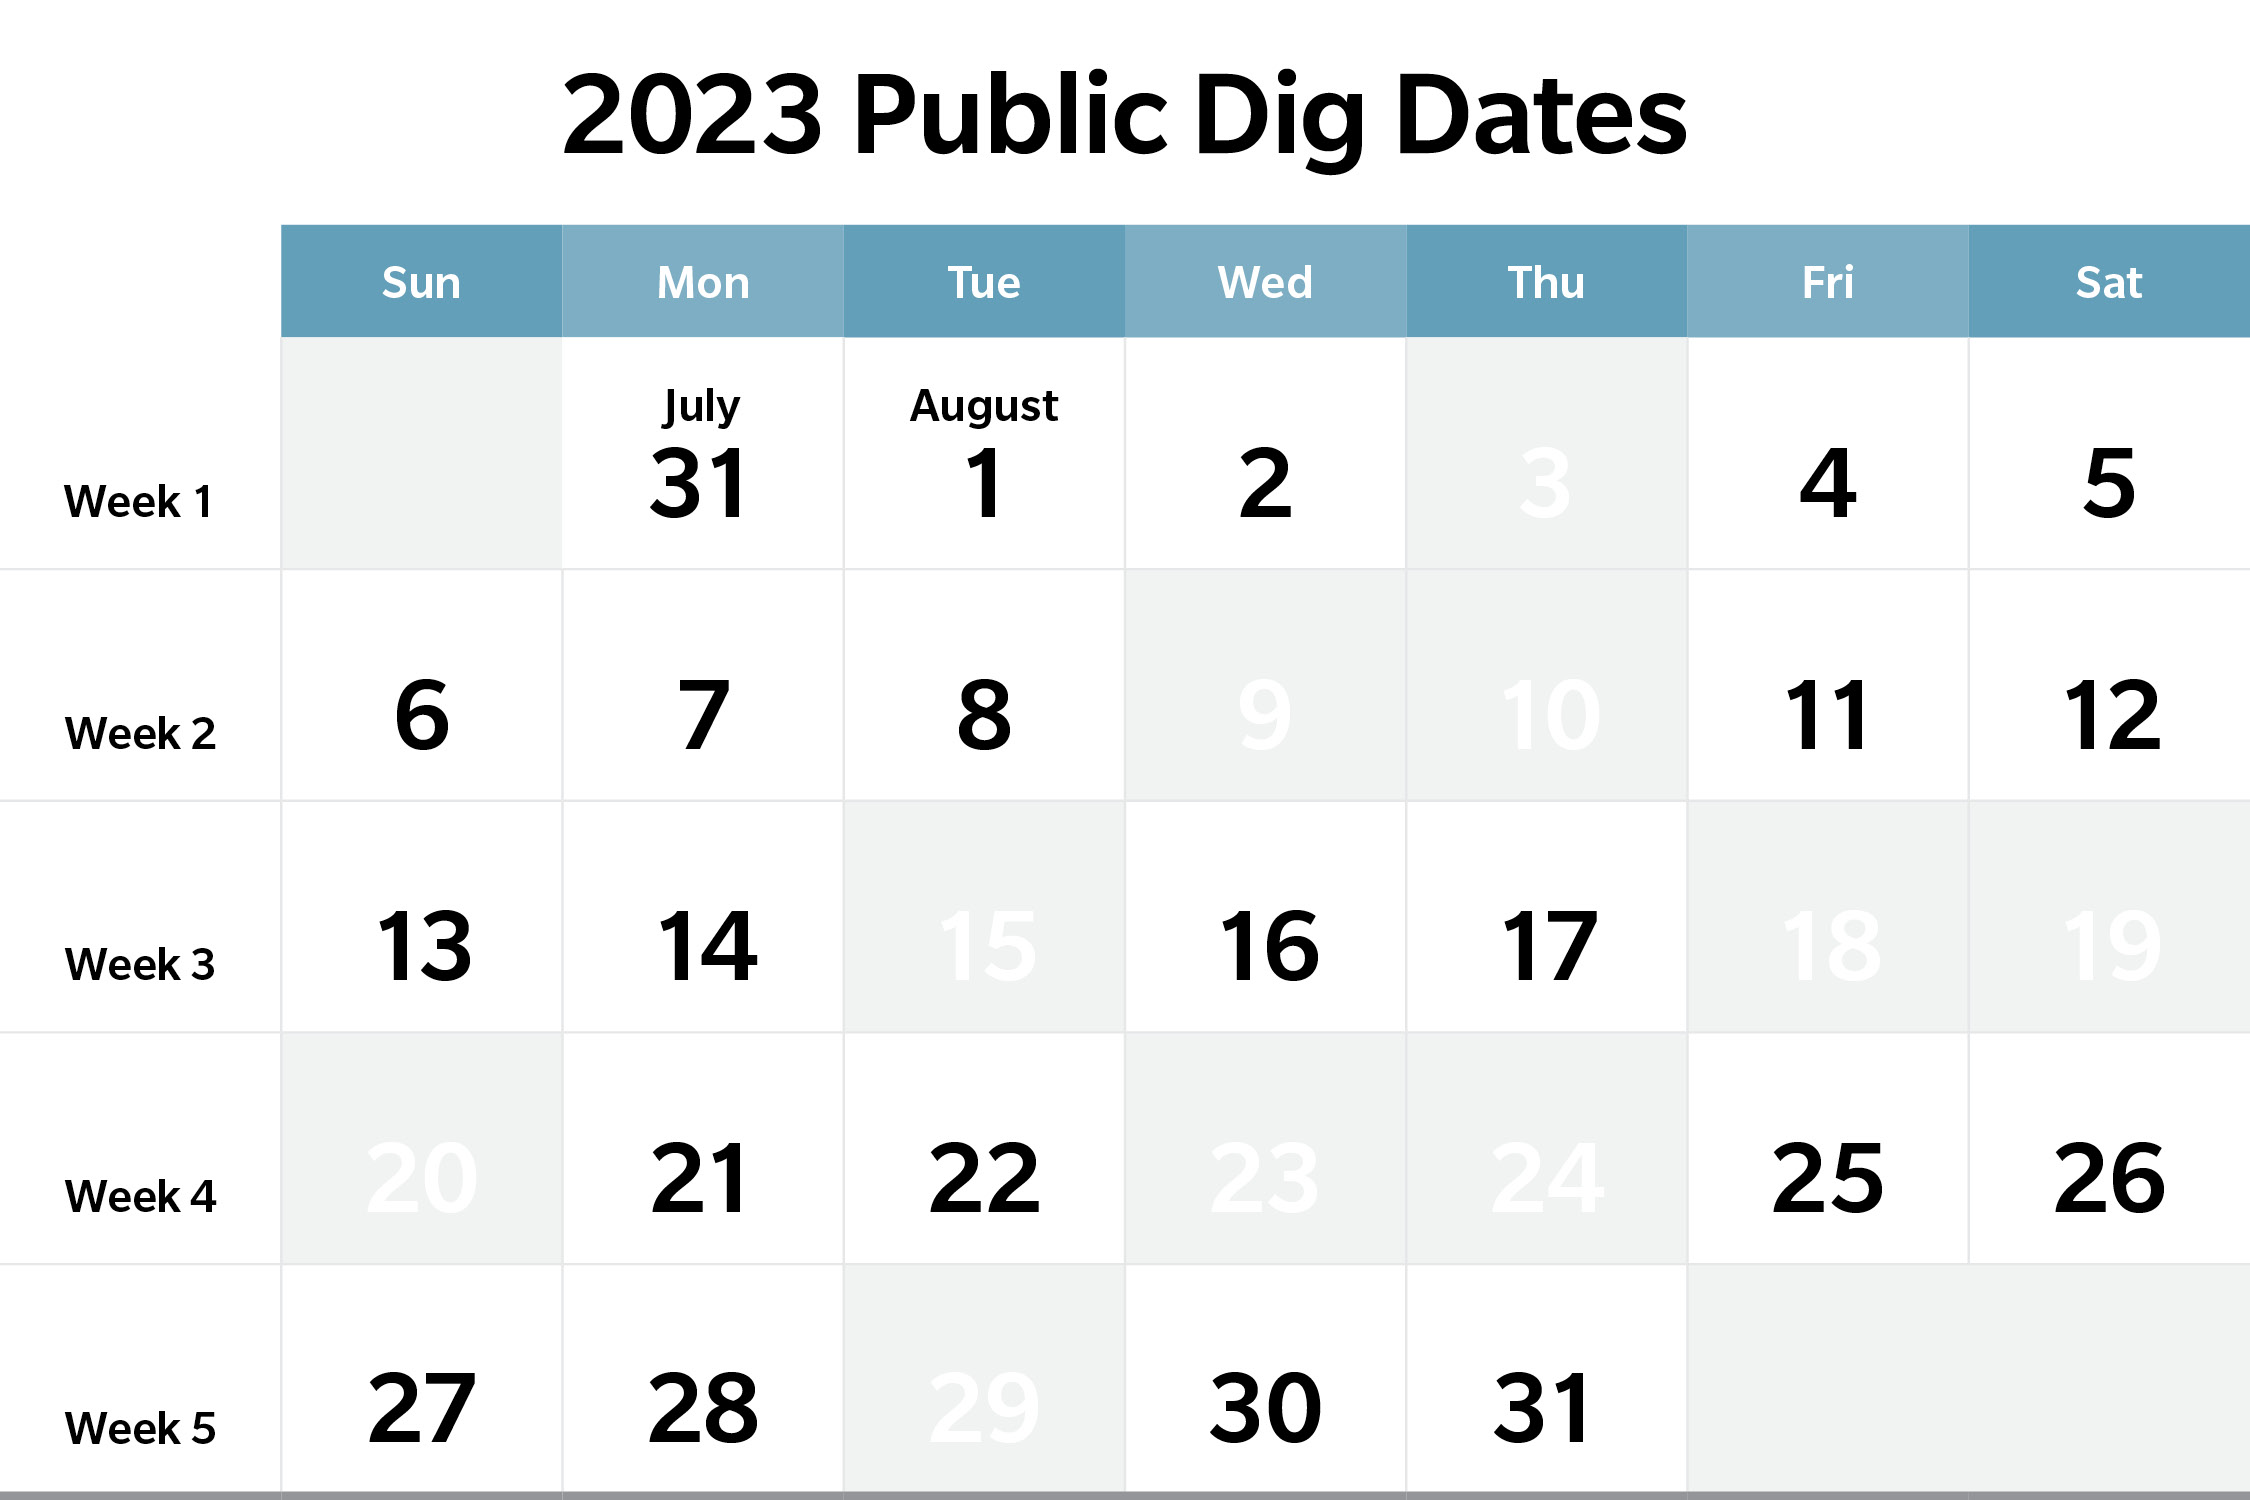 Public digs will take place from July 31 to August 2, August 4 to 8, August 11 to 14, August 16 and 17, August 21 and 22, August 25 to 28, and August 30 and 31.